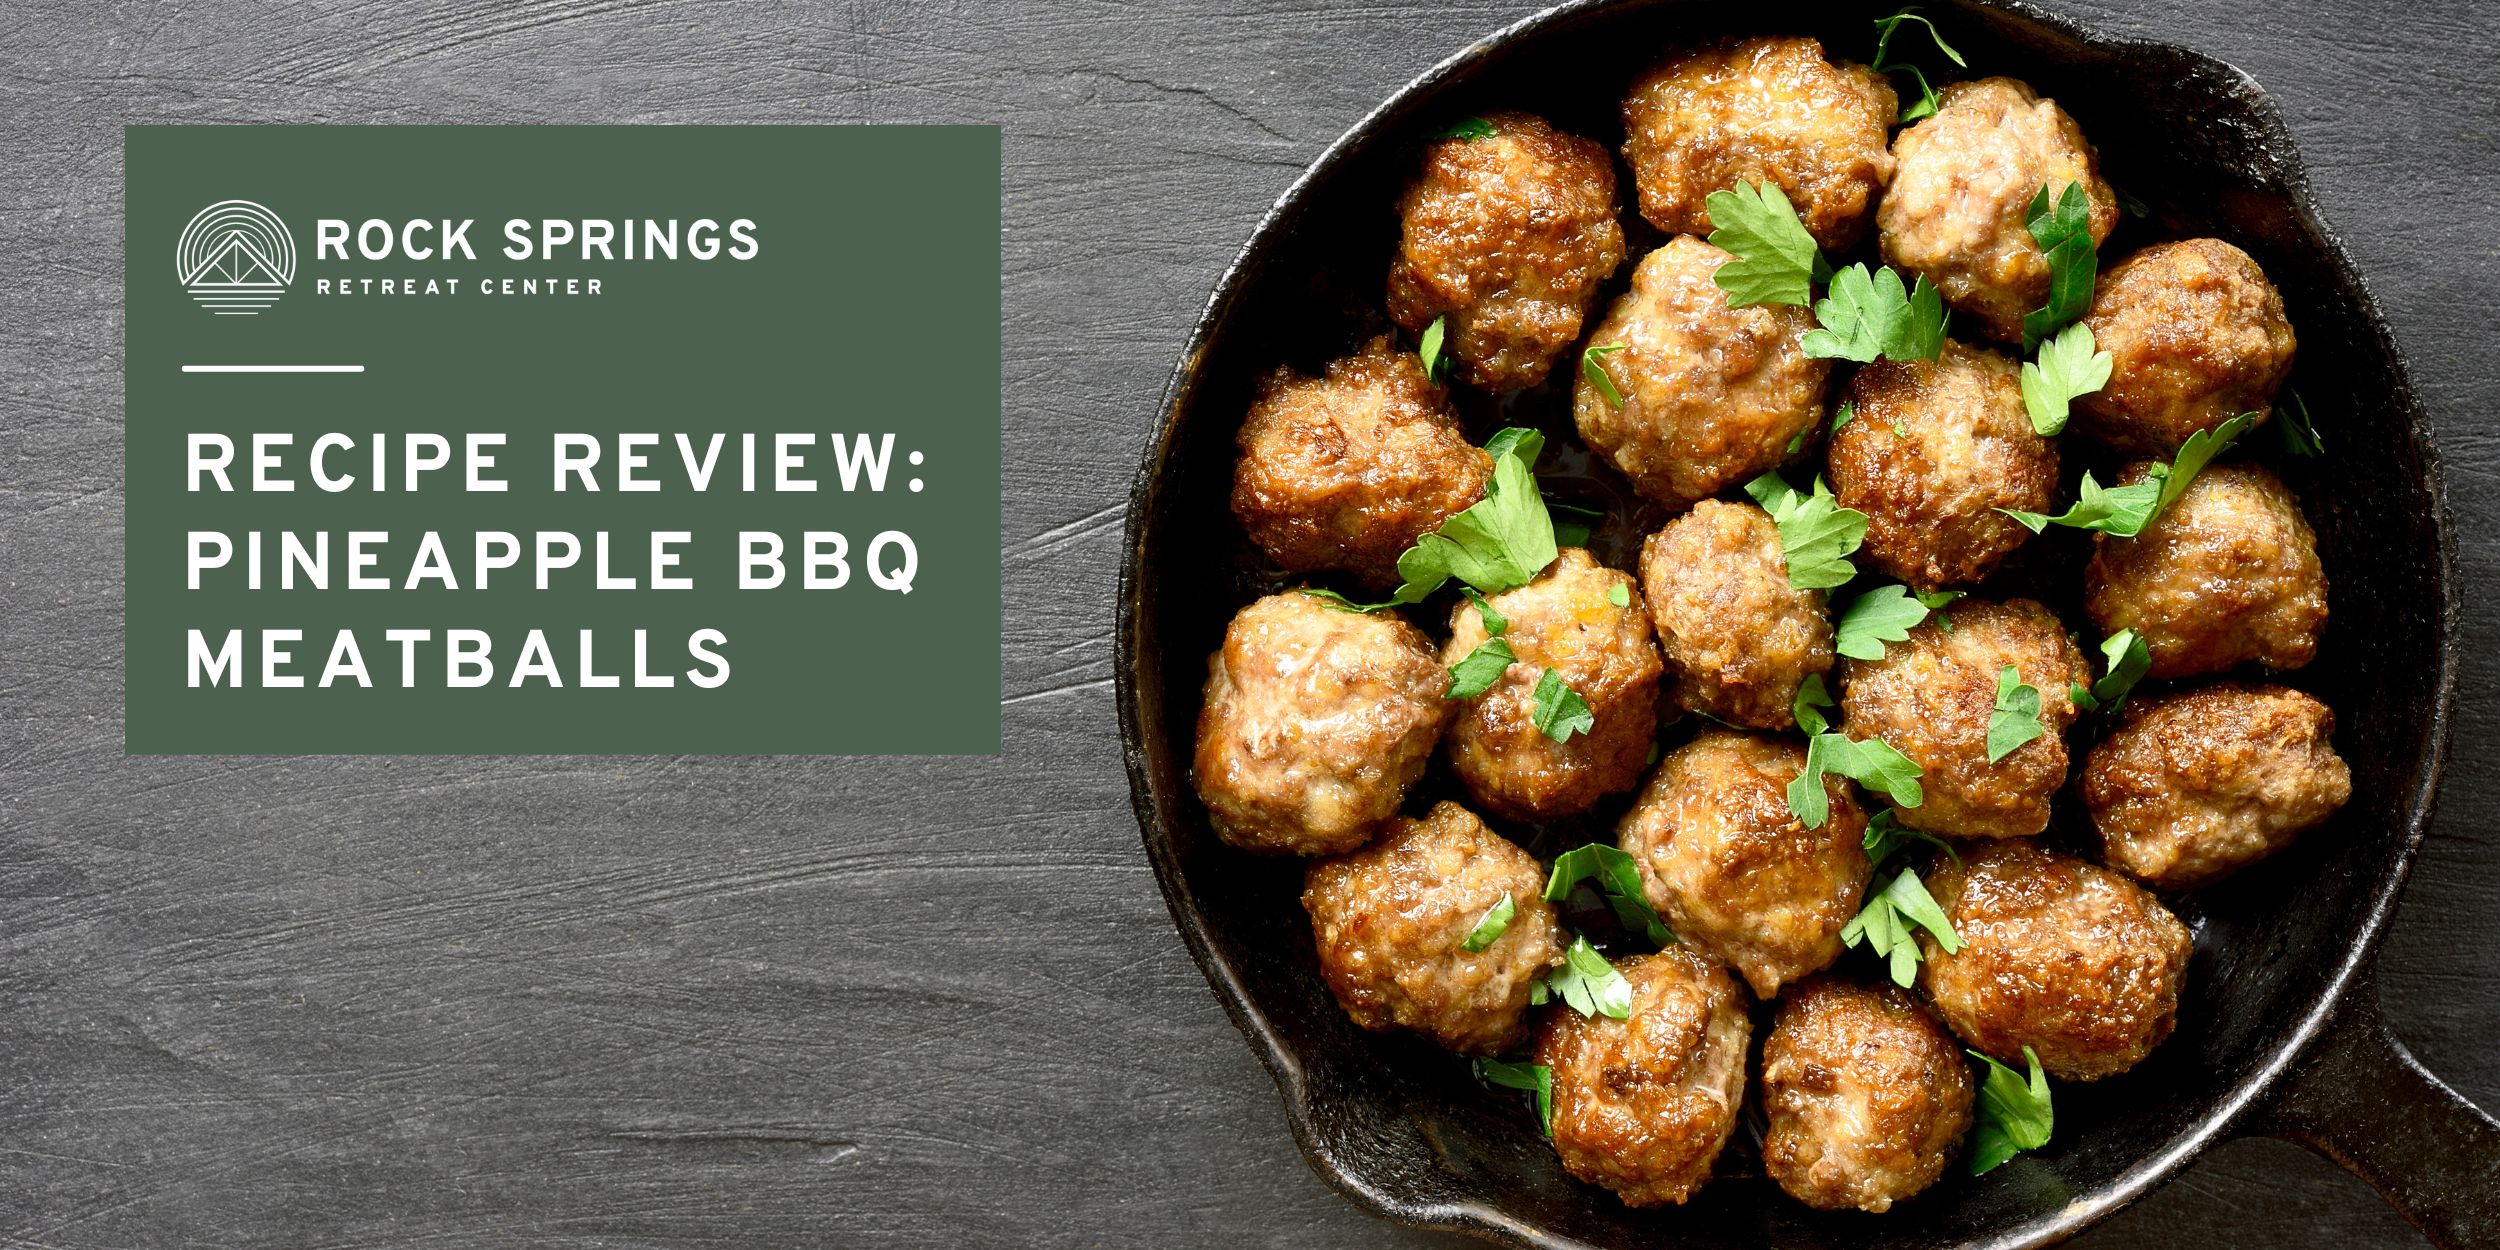 Pineapple BBQ Meatball Recipe Review